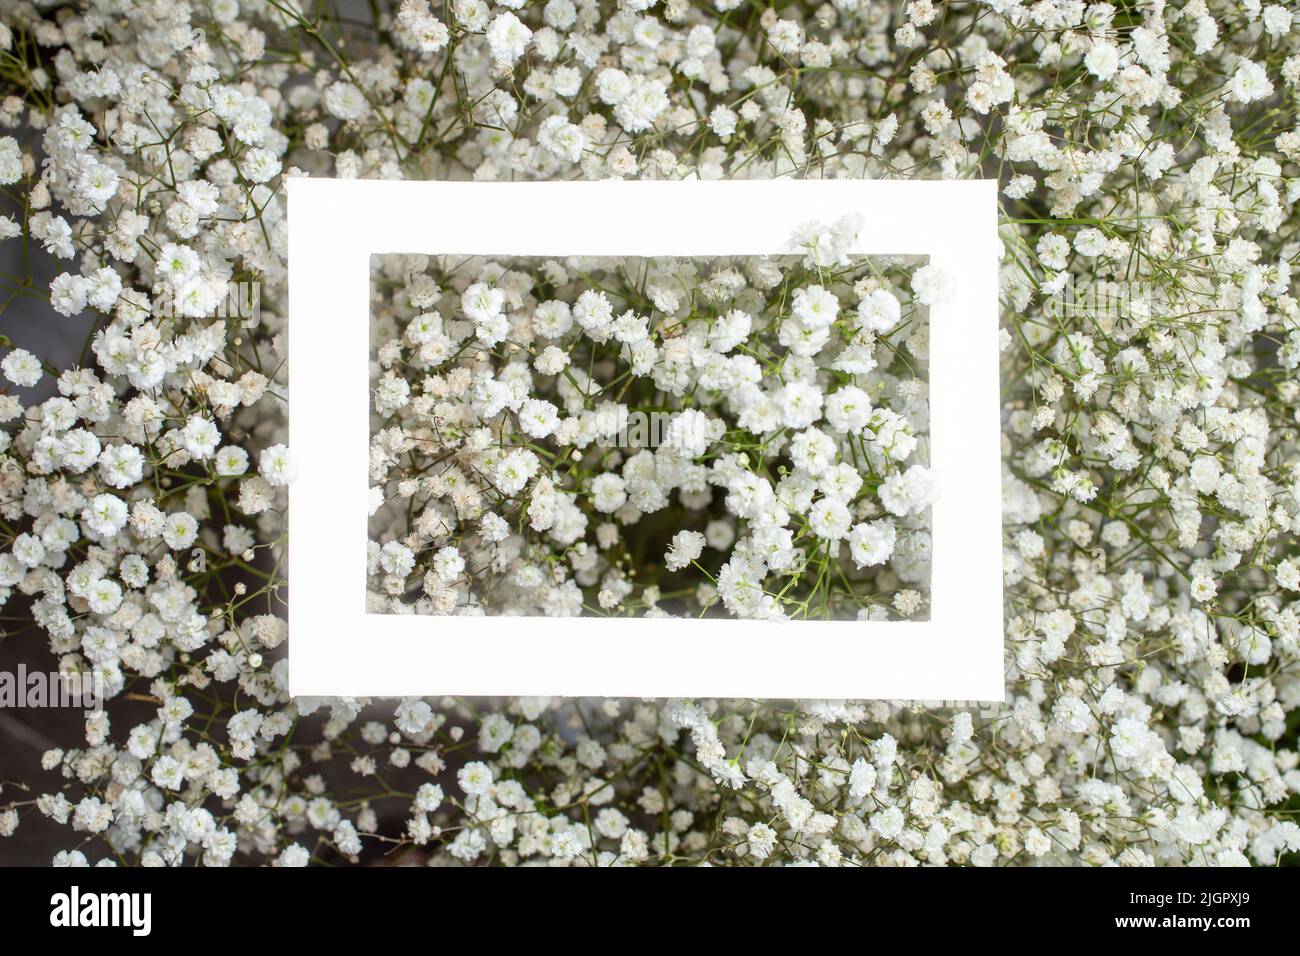 Gypsophyla paniculata little flowers with a white glowing frame in the middle. Stock Photo